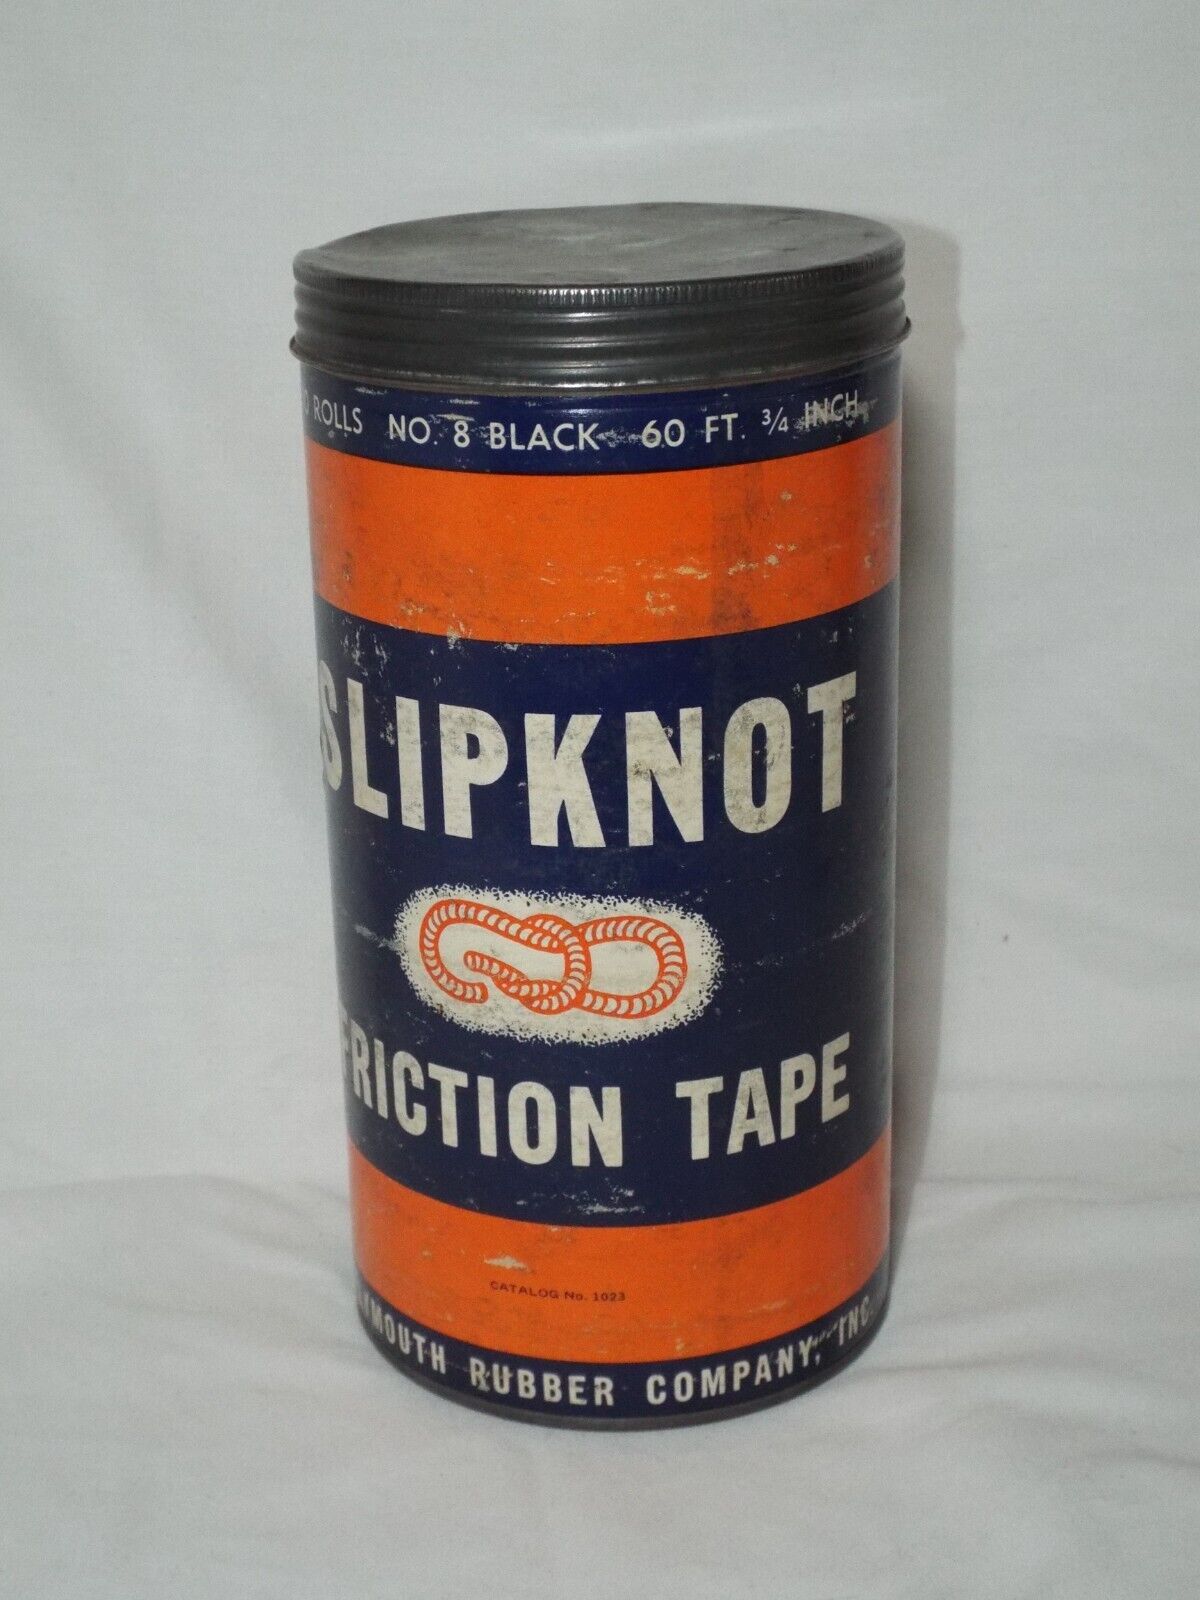 VTG Slipknot Friction Tape Tin w/10 Sealed Rolls Plymouth Rubber Canton Mass